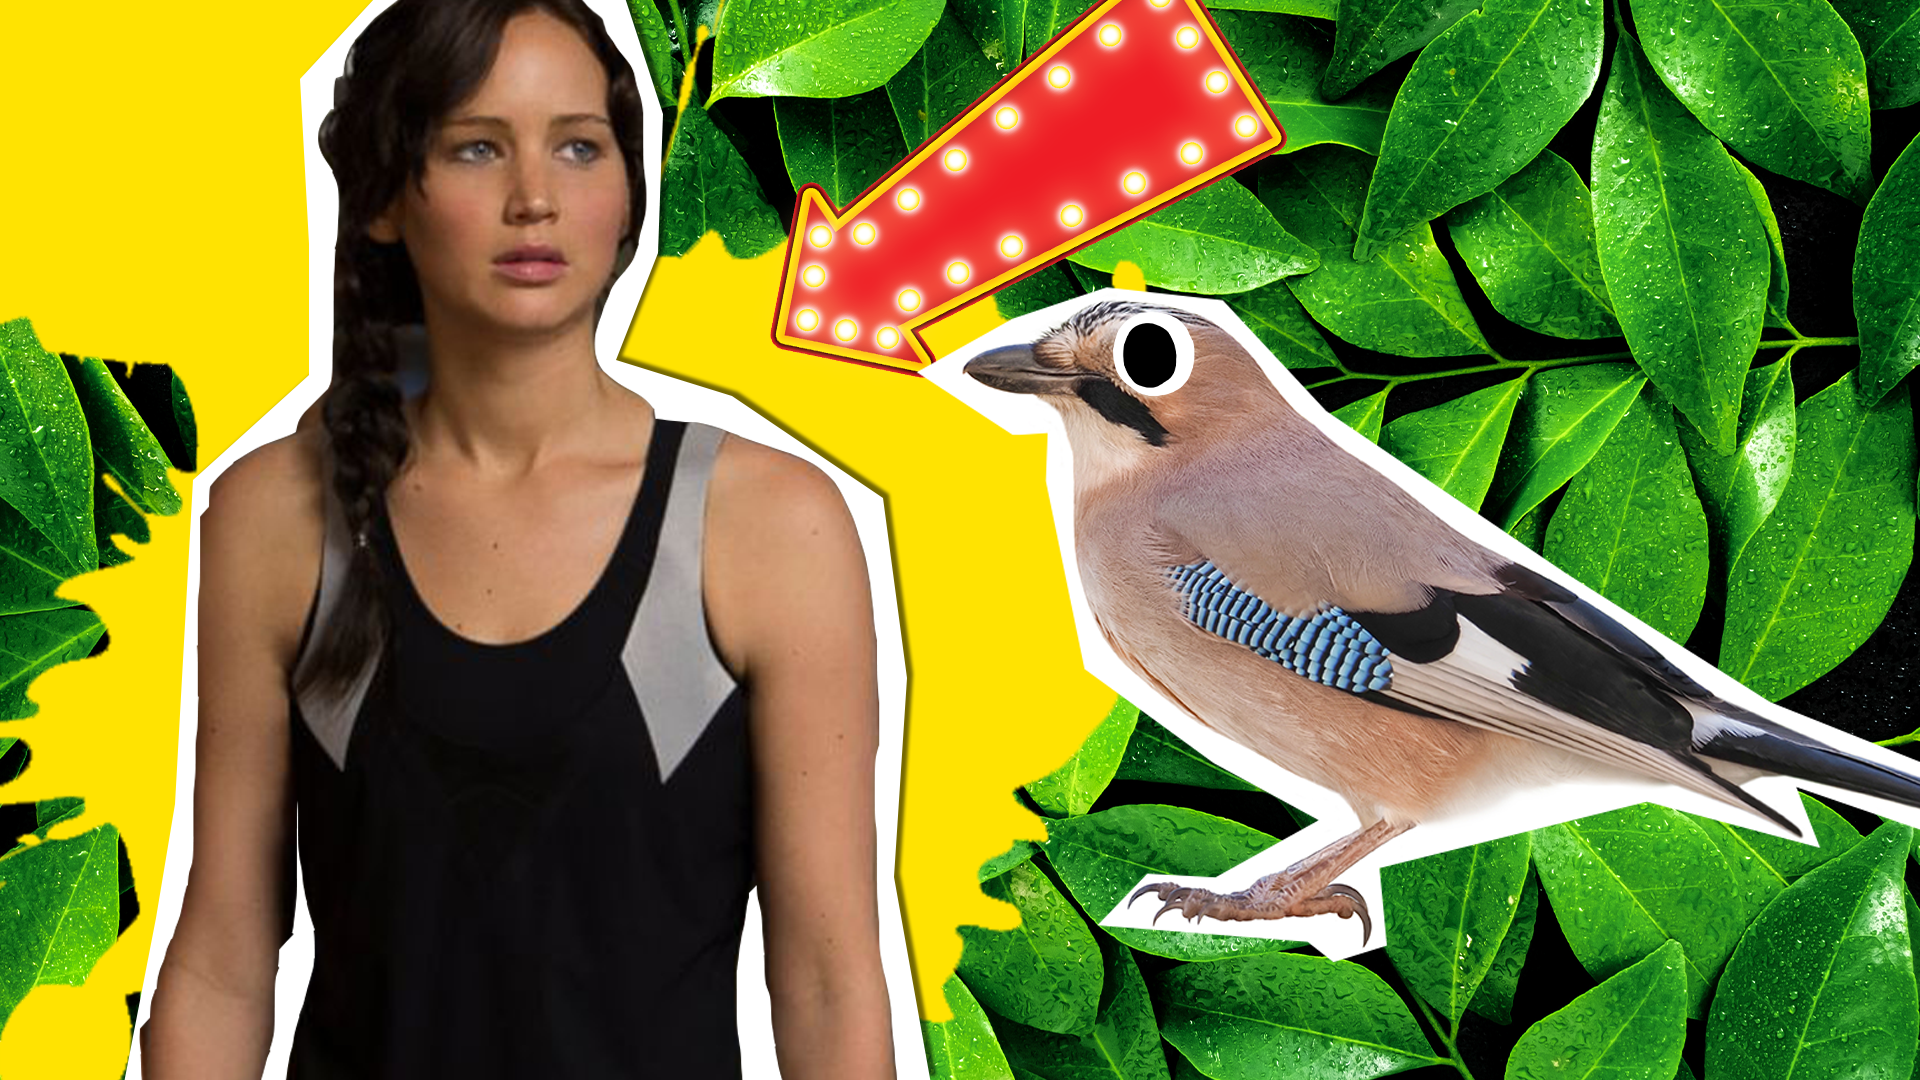 30 Facts About The Hunger Games That'll Make You Hungry For More - The Fact  Site